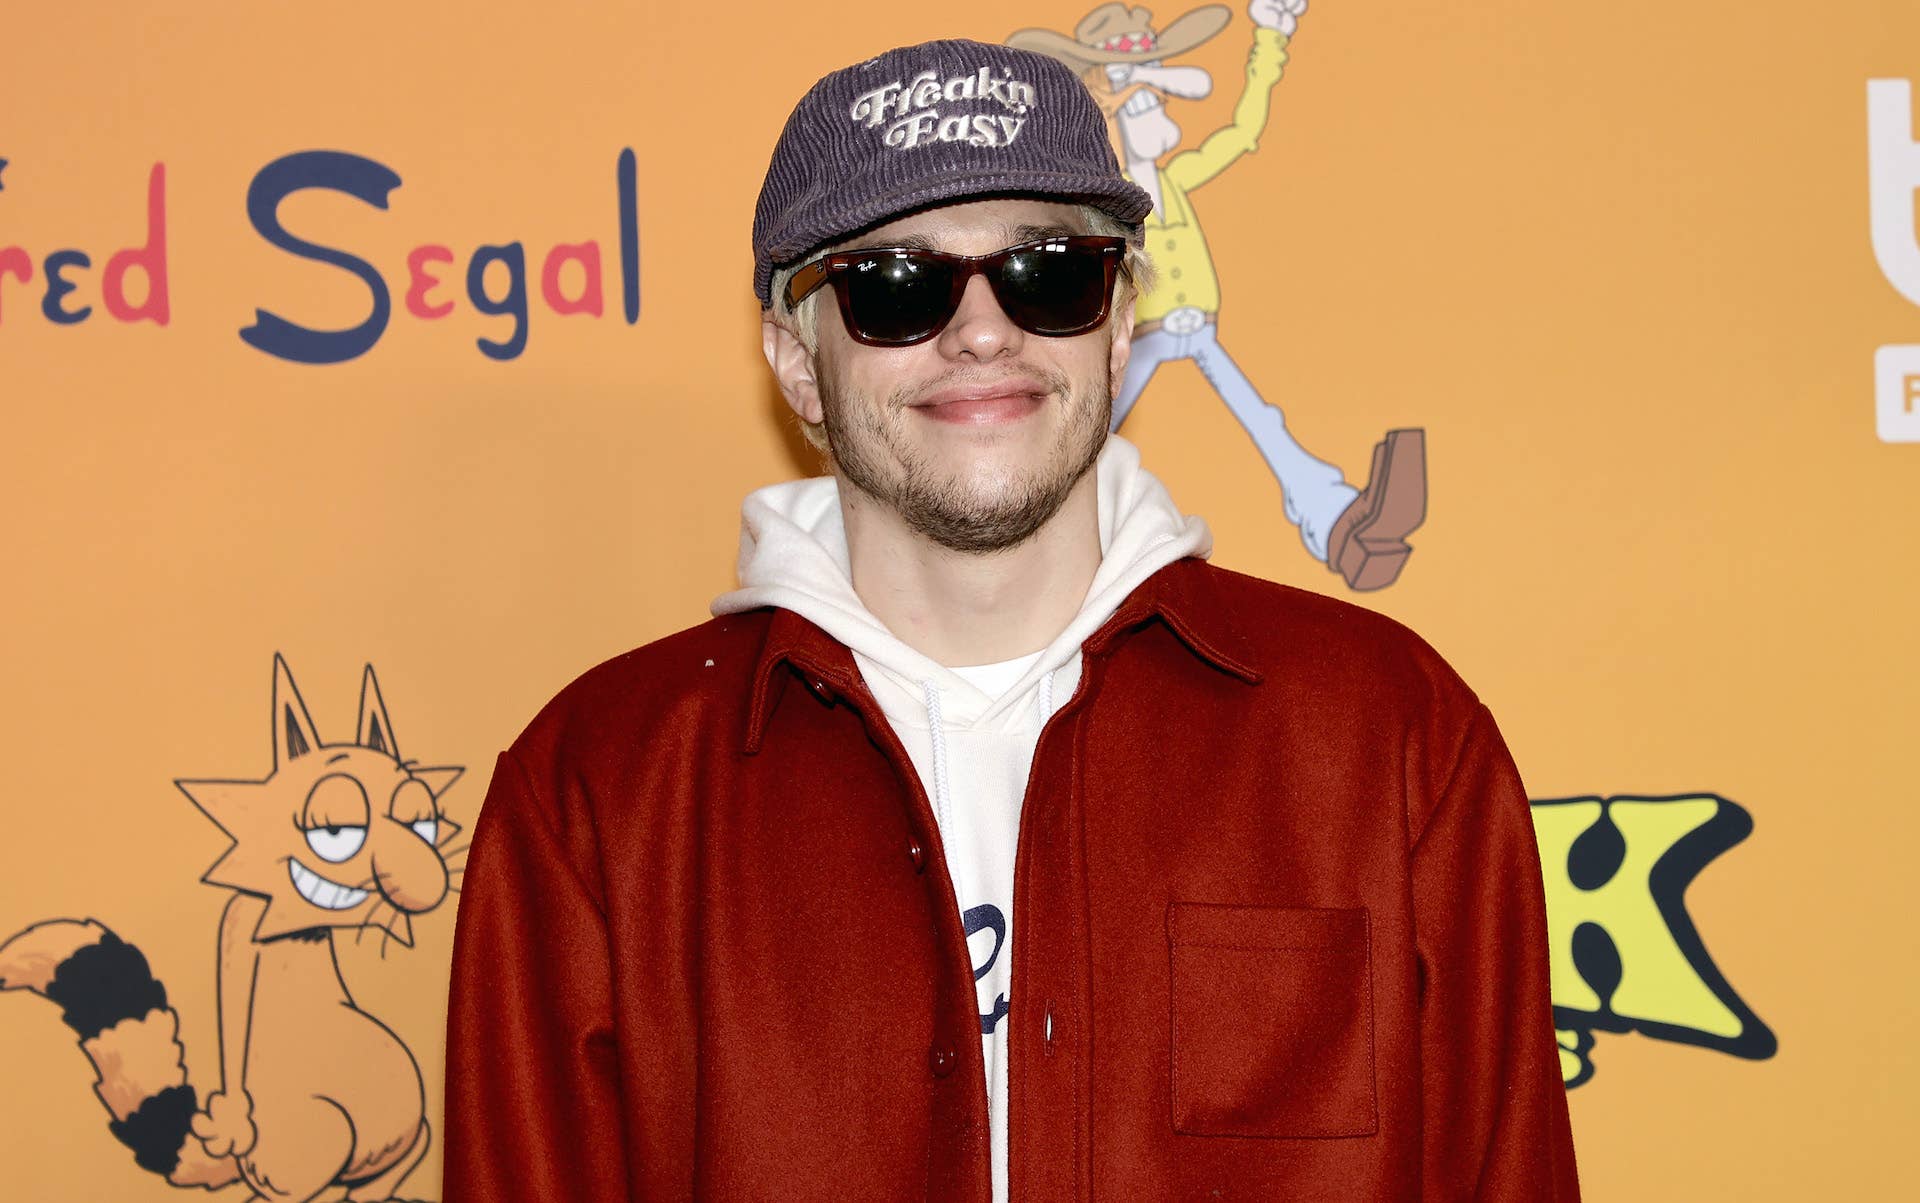 Pete Davidson appears at 'The Freak Brothers Experience'